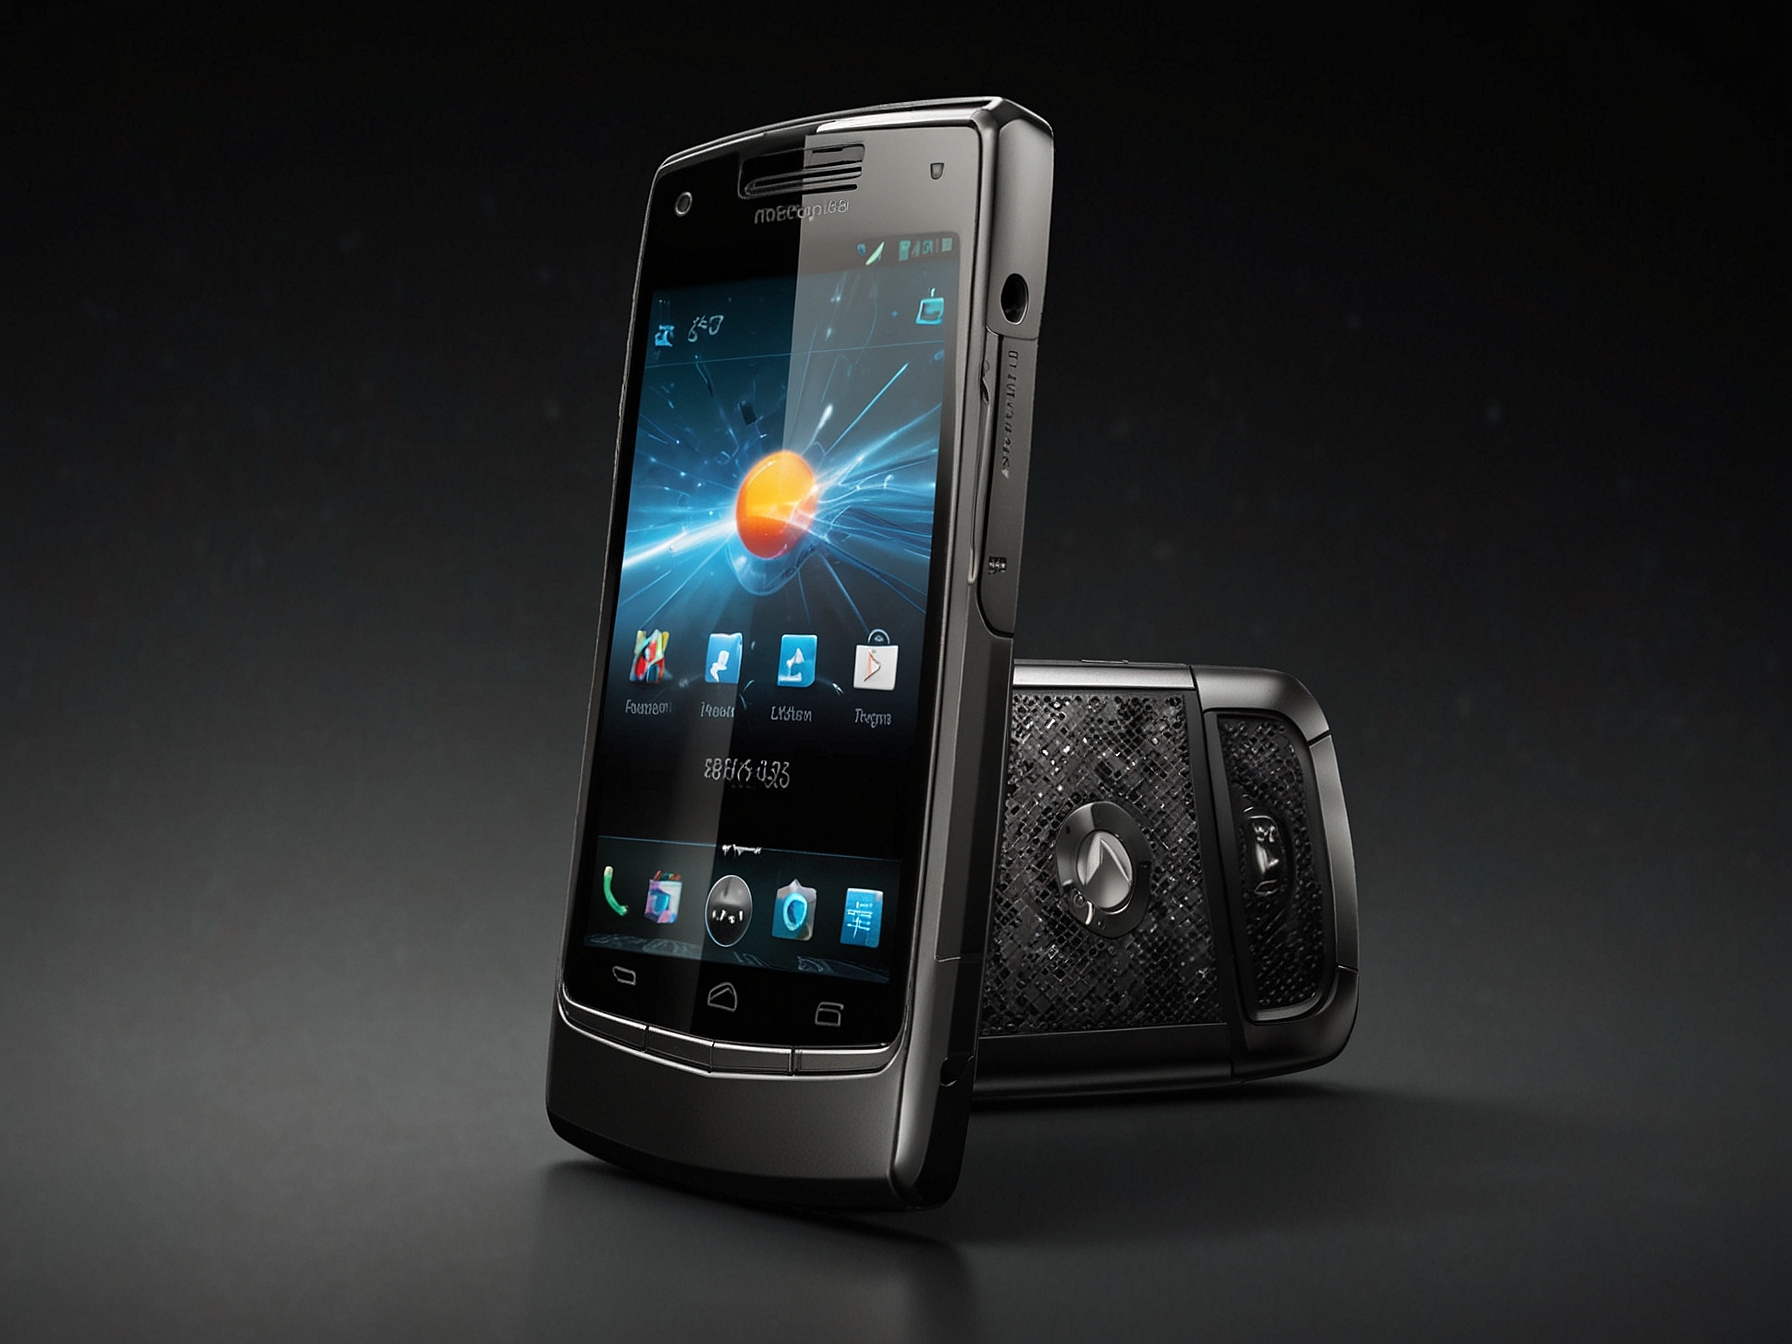 An image of the Motorola Razr 50 Ultra showcasing its sleek design and innovative flip mechanism, hinting at the upgrades from its predecessor, the Razr 40 Ultra.